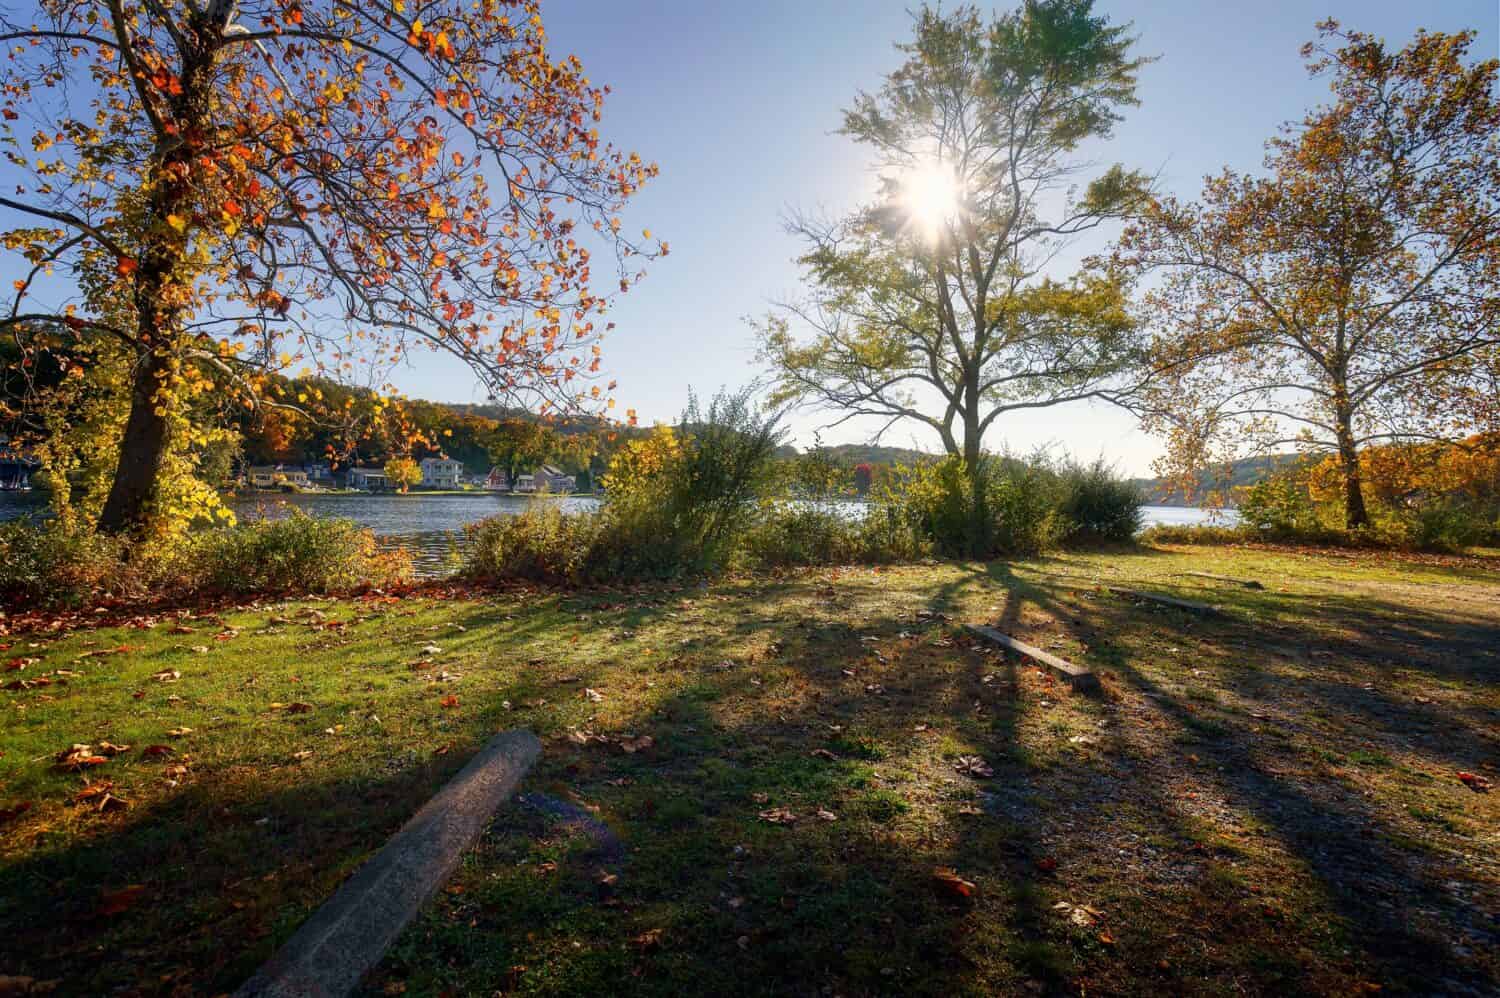 A scenic and peaceful state park located on the Housatonic River offering hiking trails, swimming areas, and camping sites.